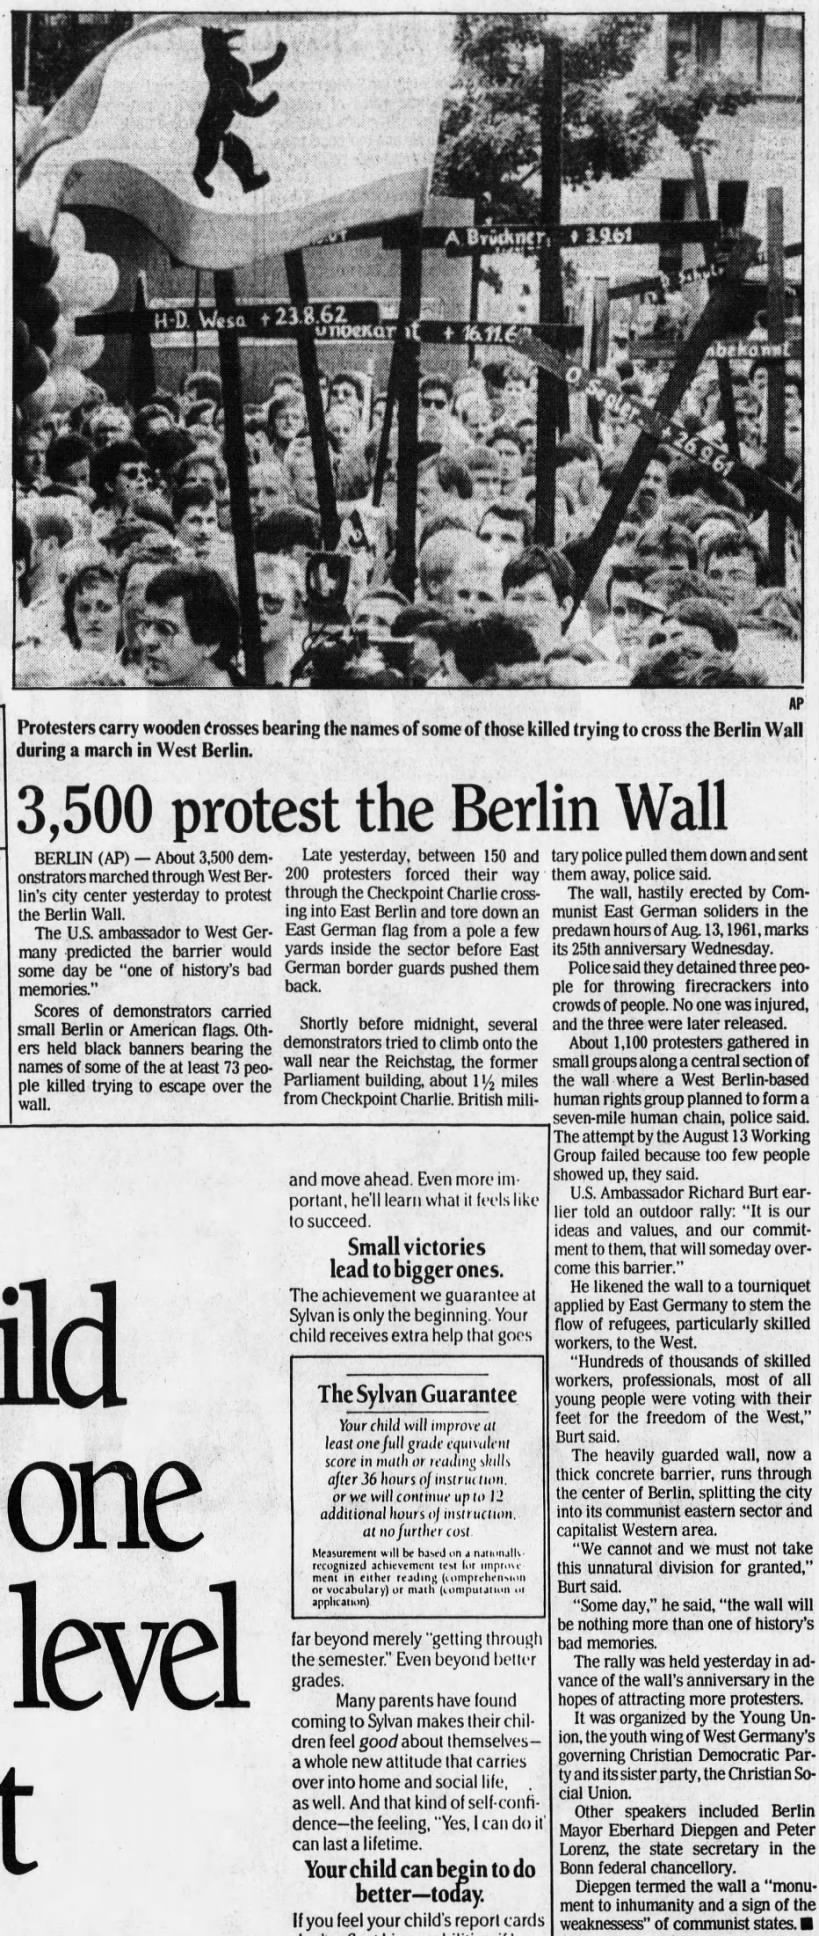 Protest in West Berlin against the Berlin Wall brings thousands